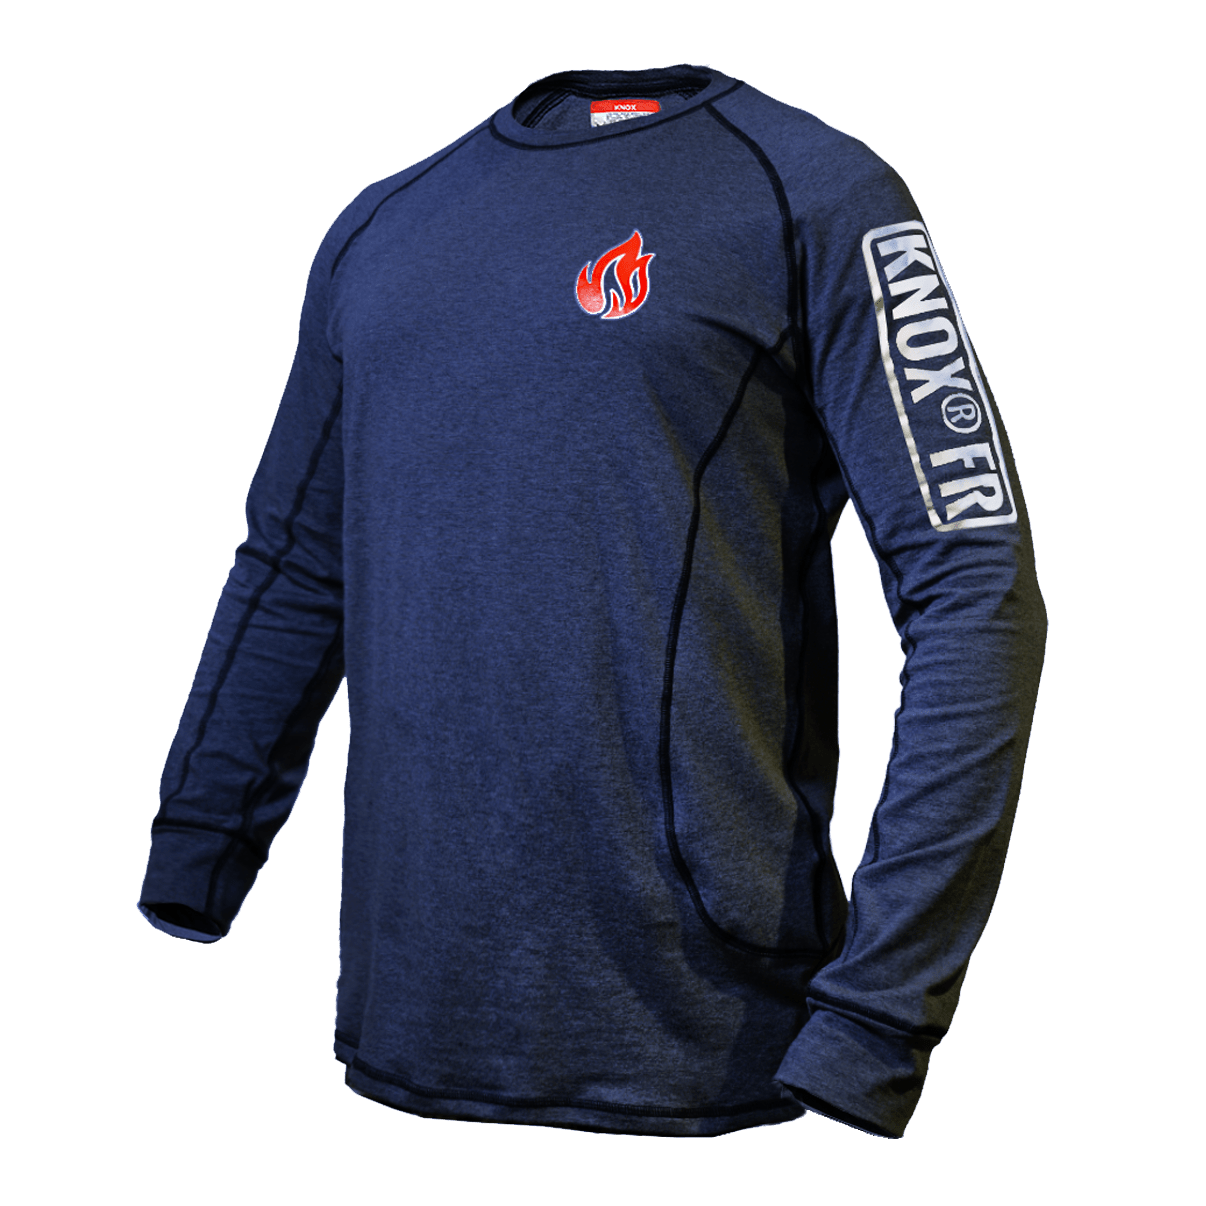 Knox Incorporated Apparel & Accessories Knox FR Long Sleeve Crew Shirt - Space Blue